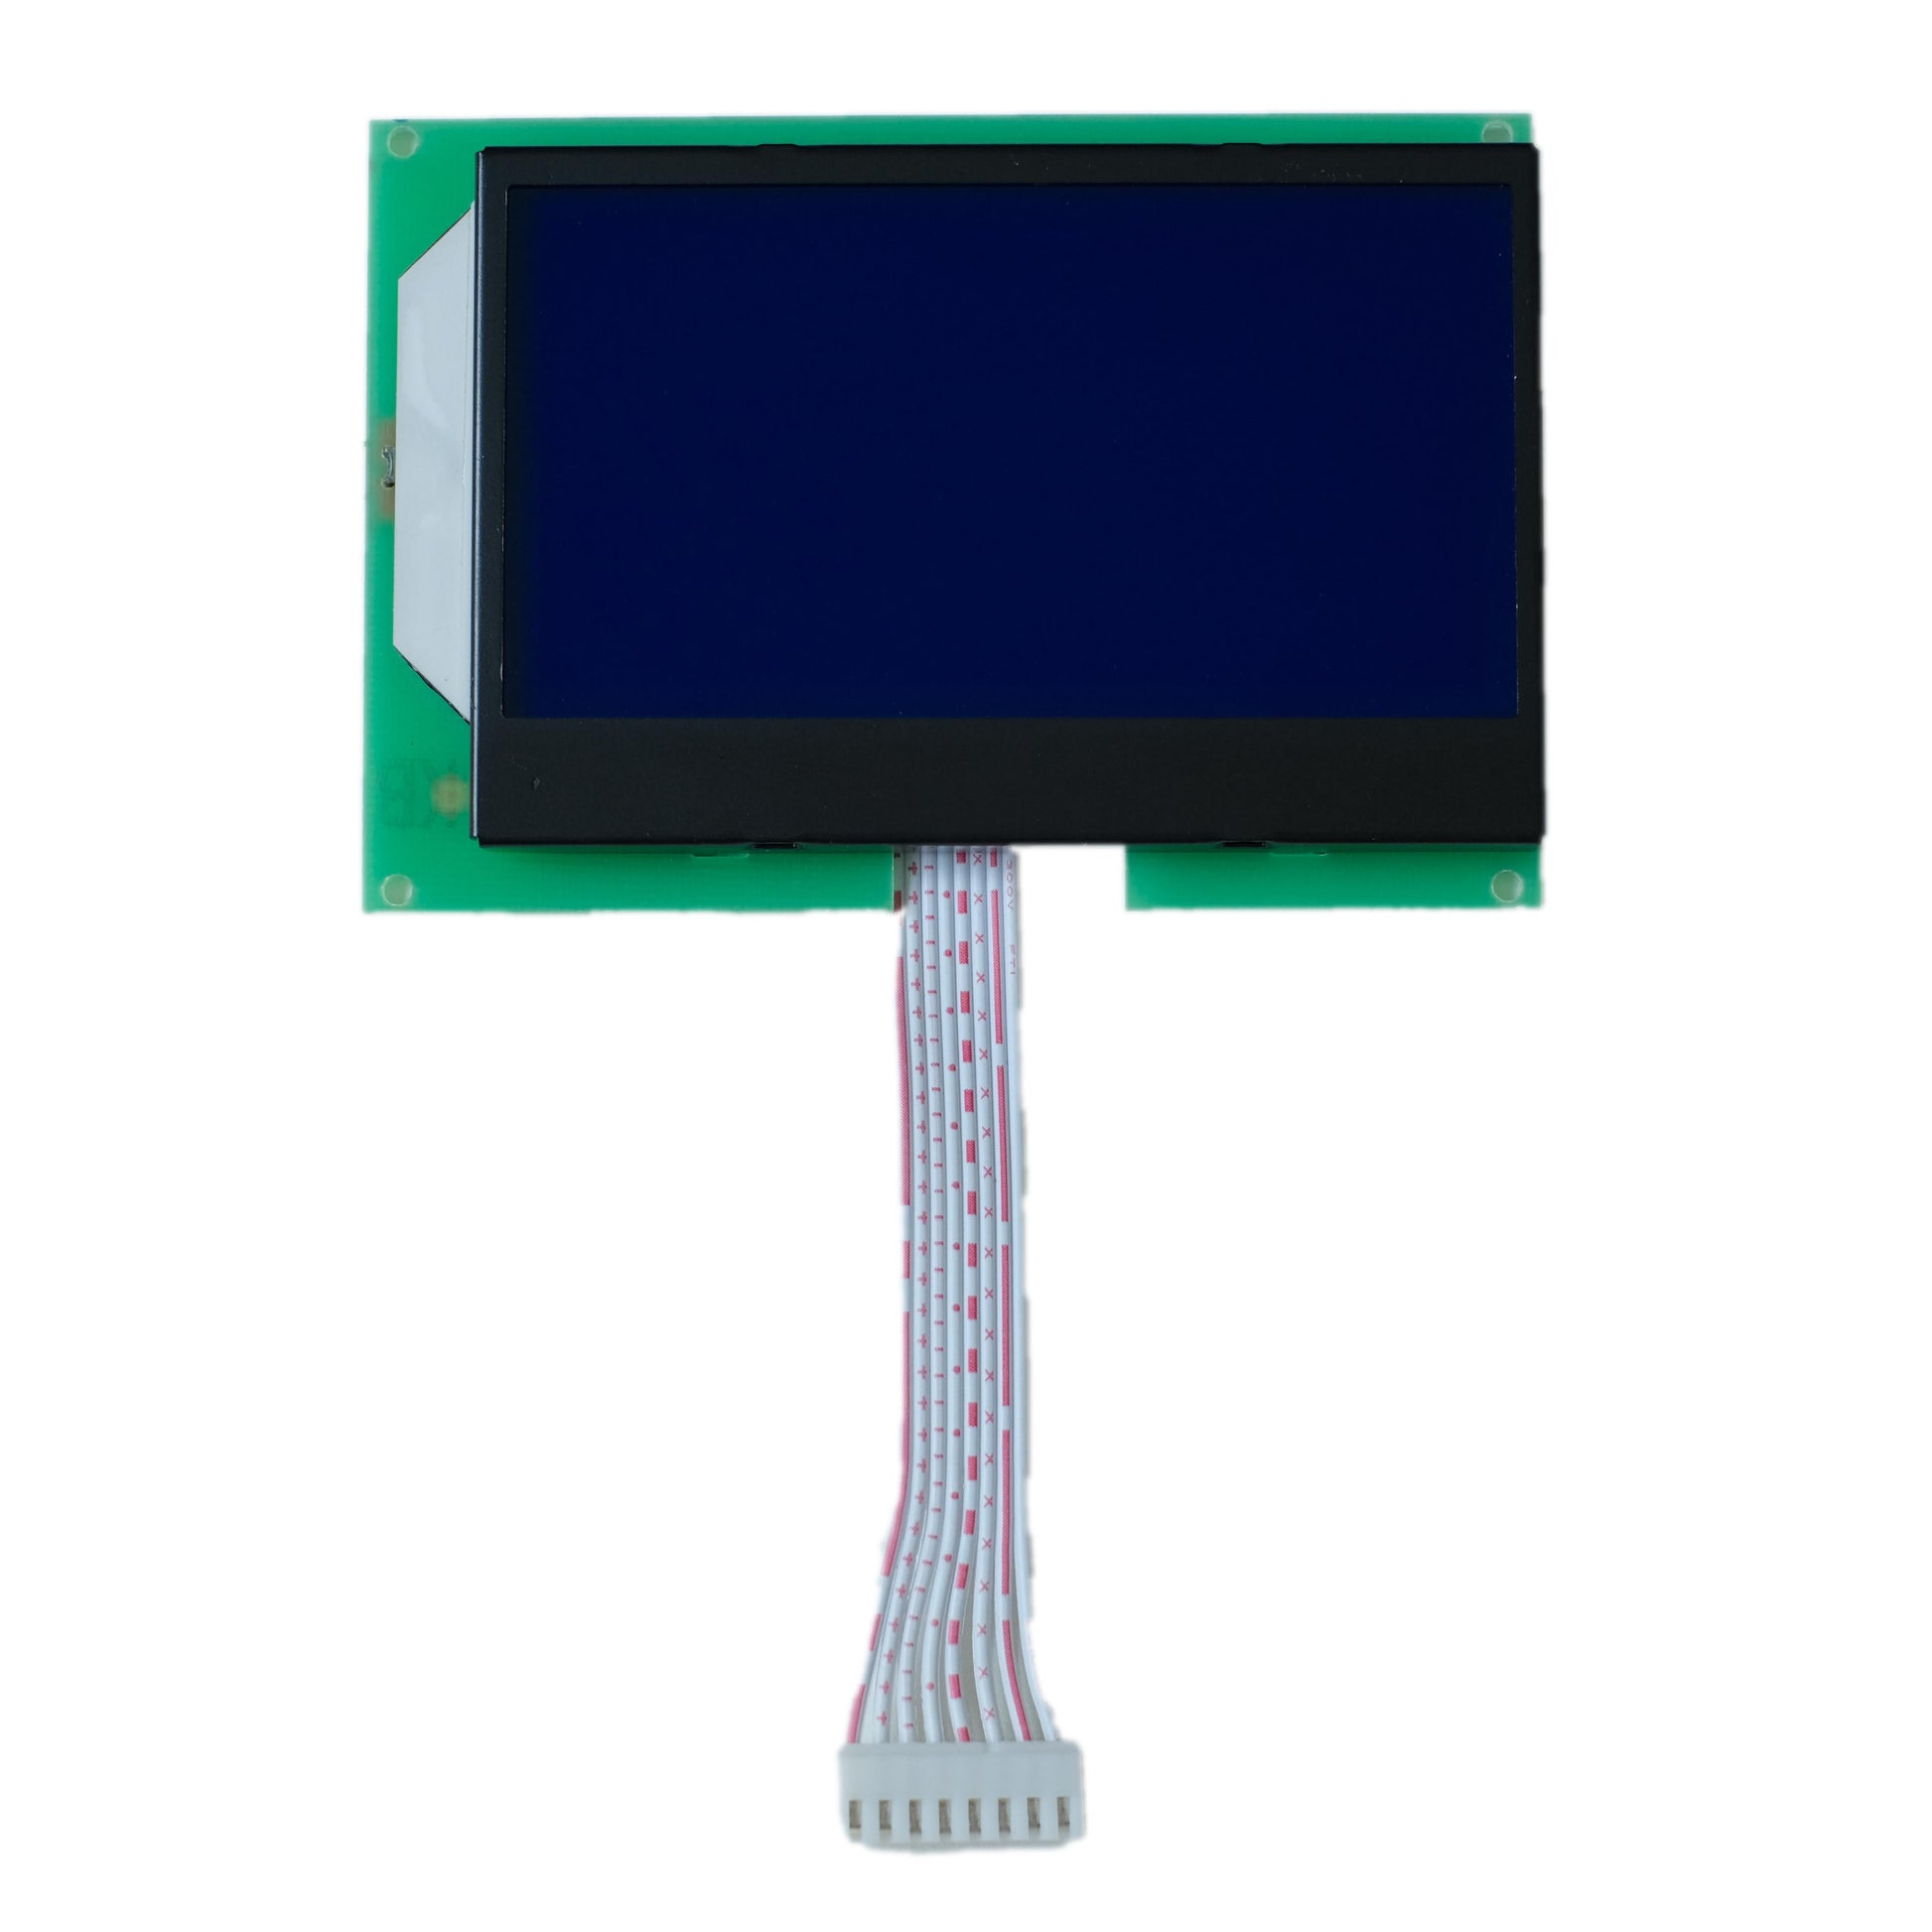 128x64 blue COG LCD 3.87 inch blue graphic display panel with SPI interface